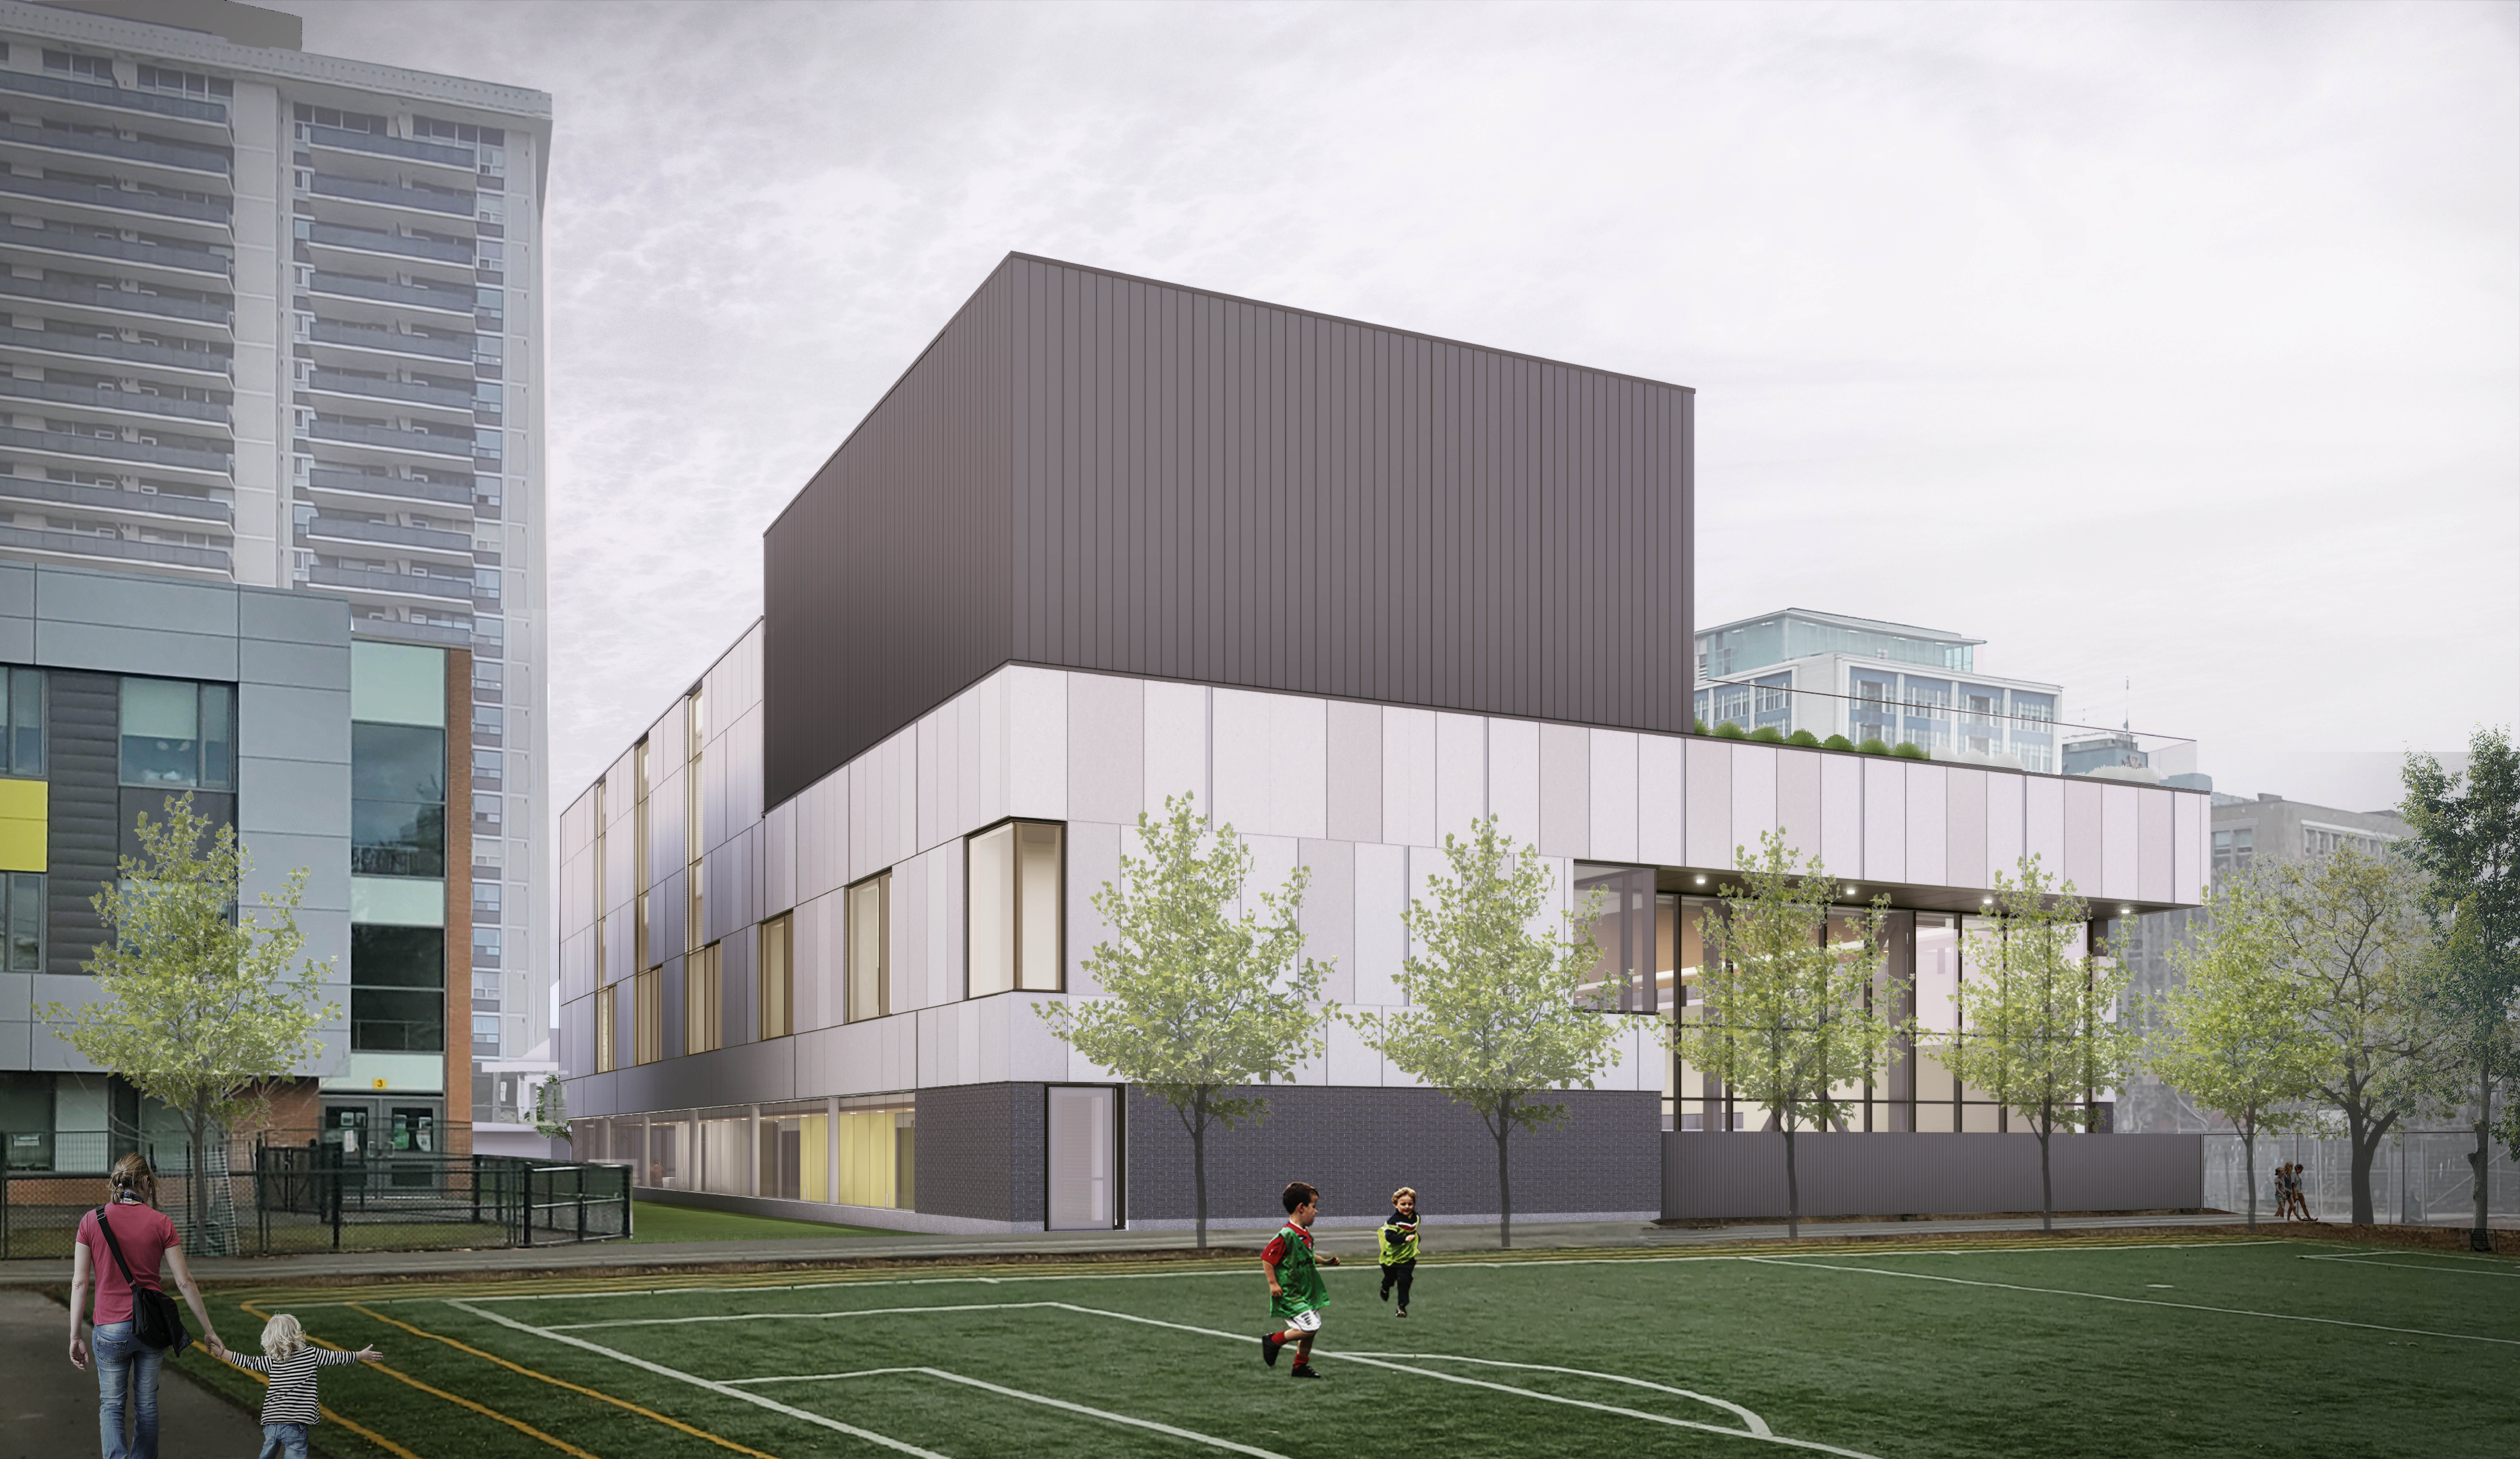 A rendering of the new centre looking southwest from the northwest side of the Spectrum Alternative School yard. There are large windows on the north-west side of the building, into the aquatic centre. There is a fence along the main floor to block off views between the school yard and the aquatic space. The third-floor rooftop is viewable from the yard, which has clear safety railings and plantings. There is a walkway on the west side of the new Centre. On the east side of the centre facing the school are windows on the entire main floor, and periodically on the second and third floors.